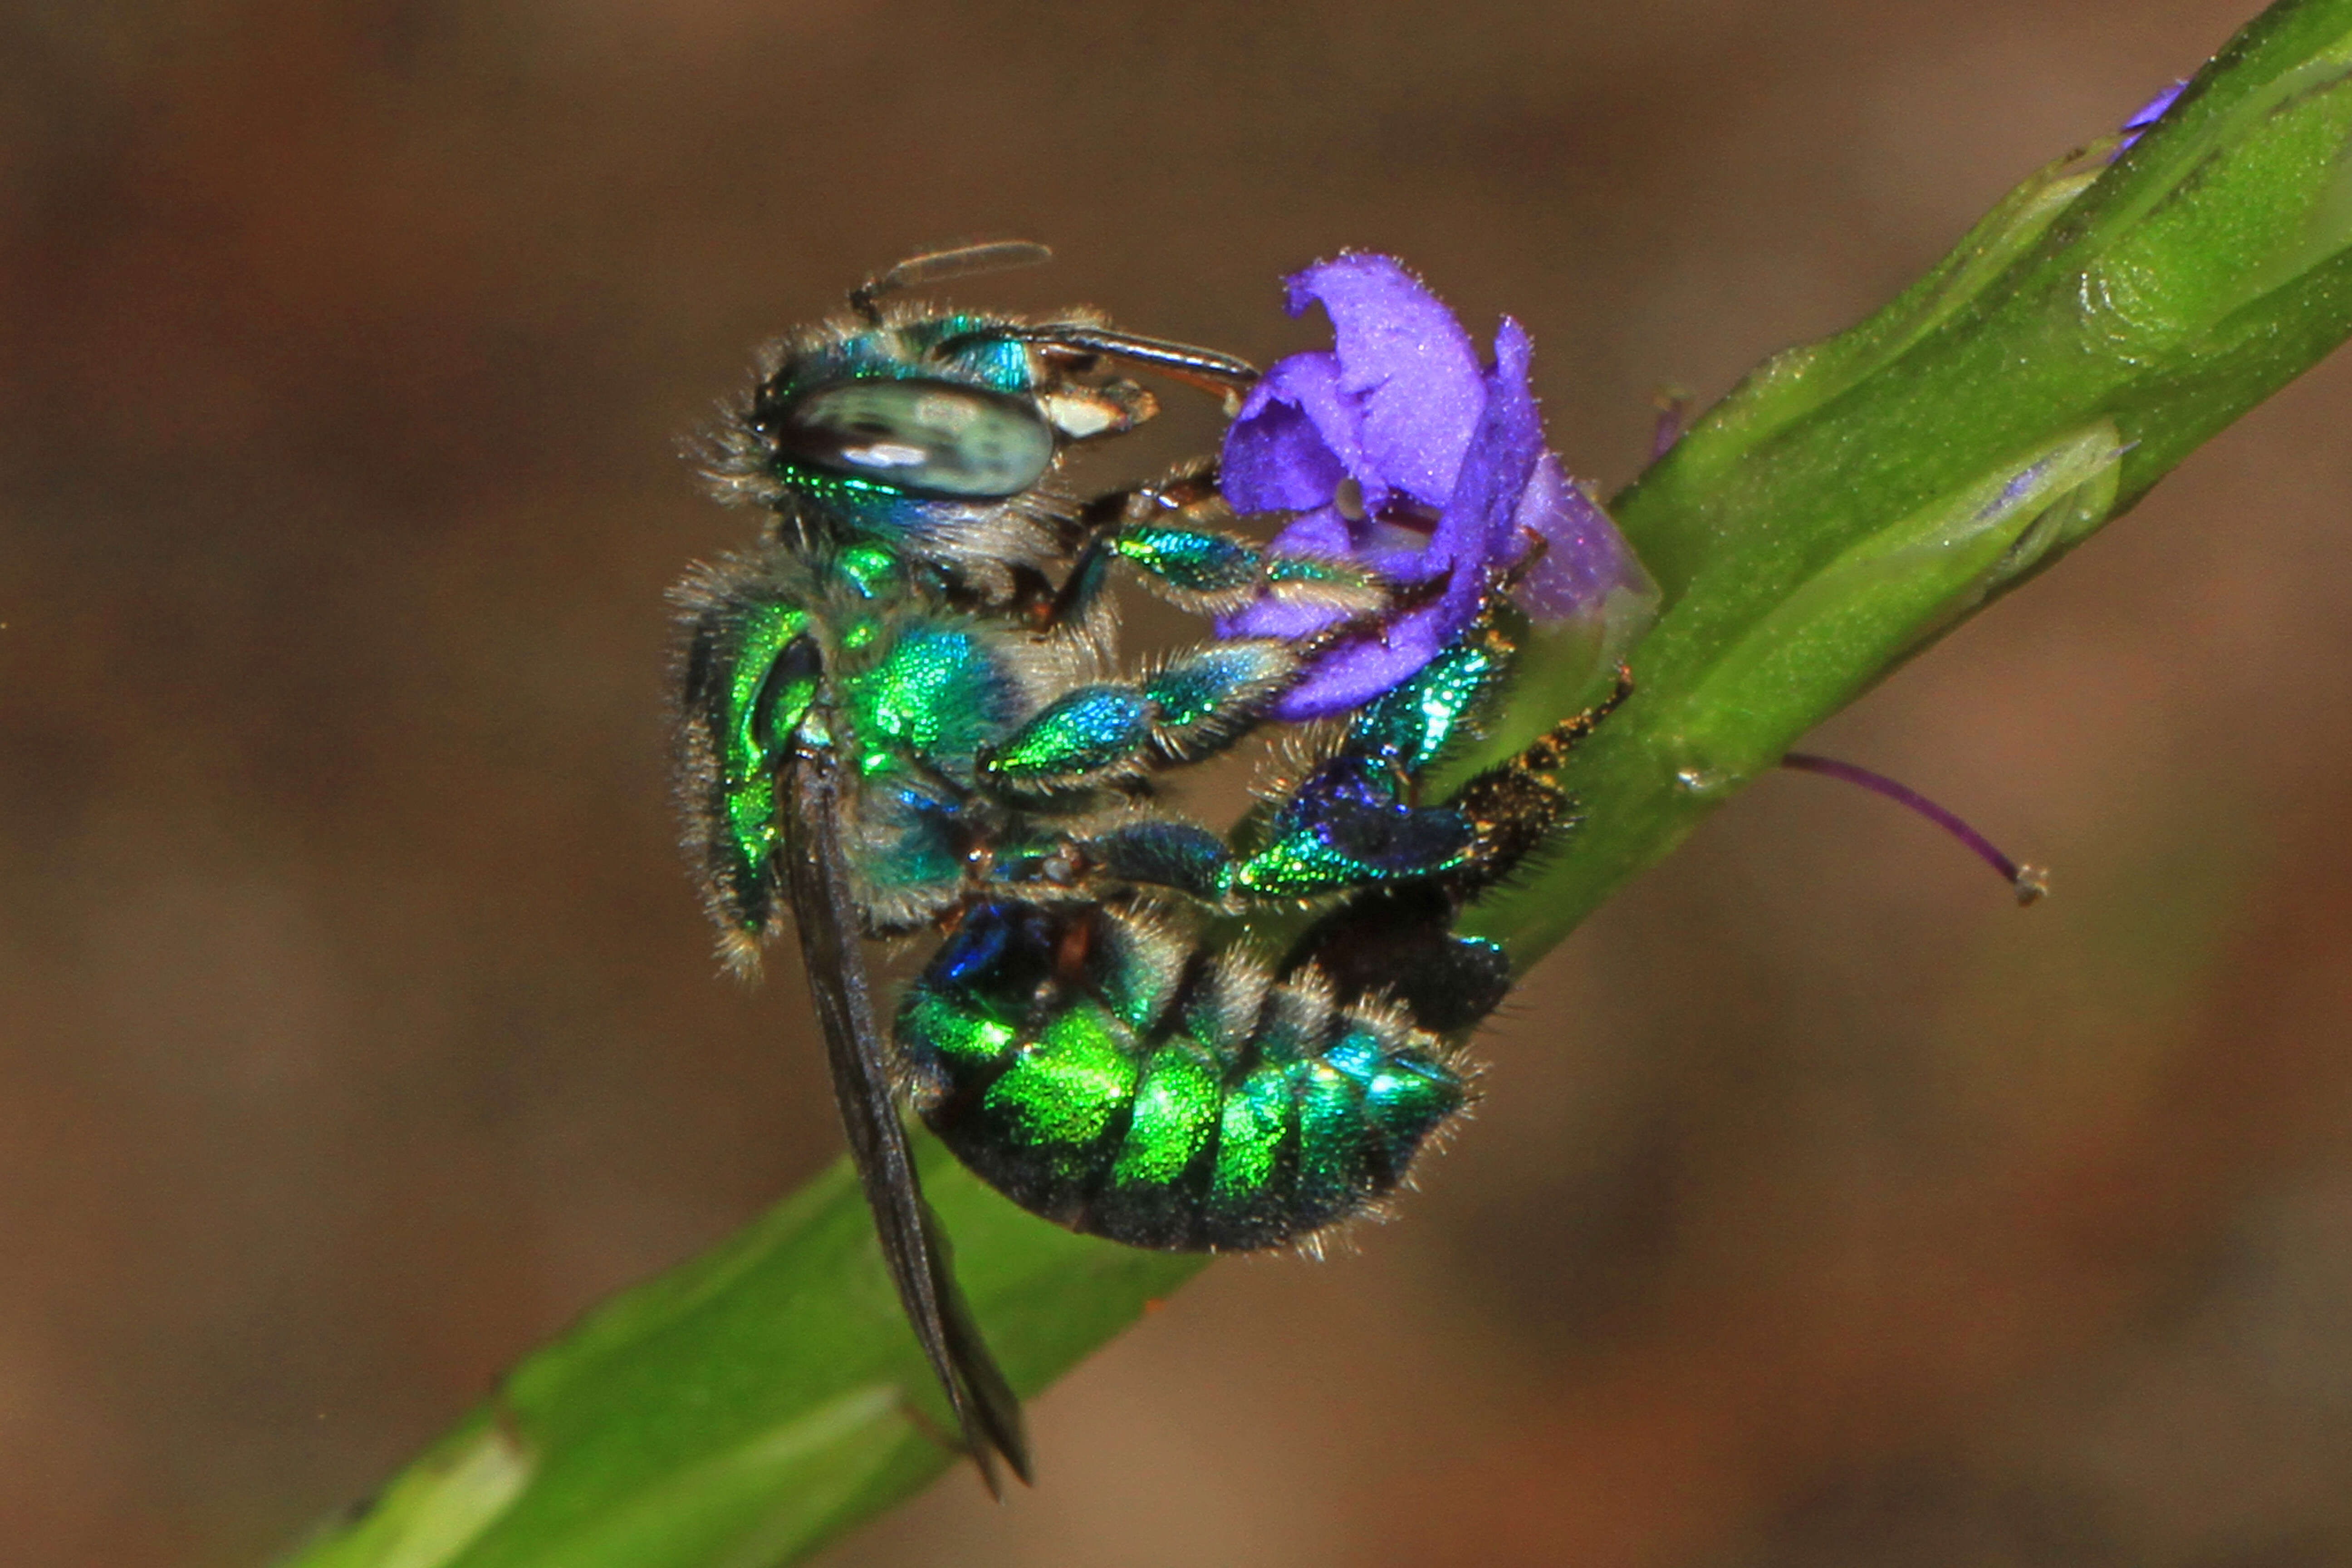 Image of Dilemma Orchid Bee